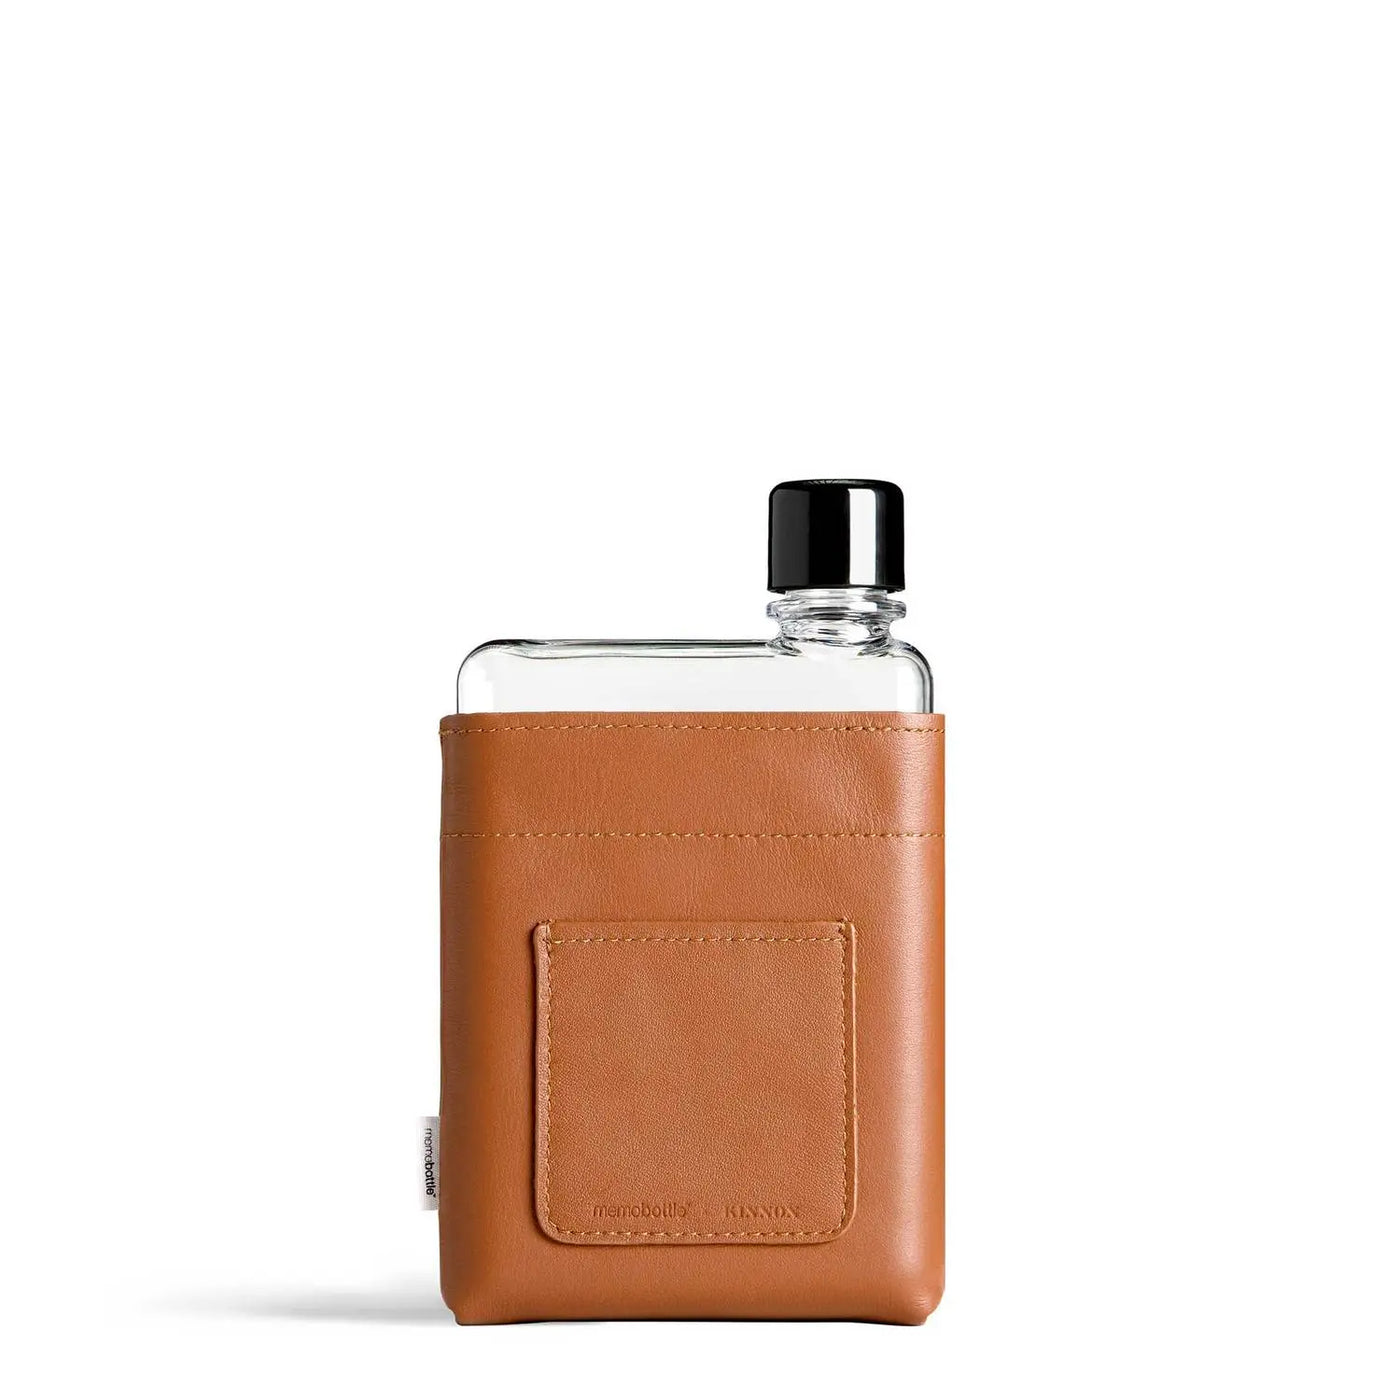 A6 Memobottle Leather Sleeve